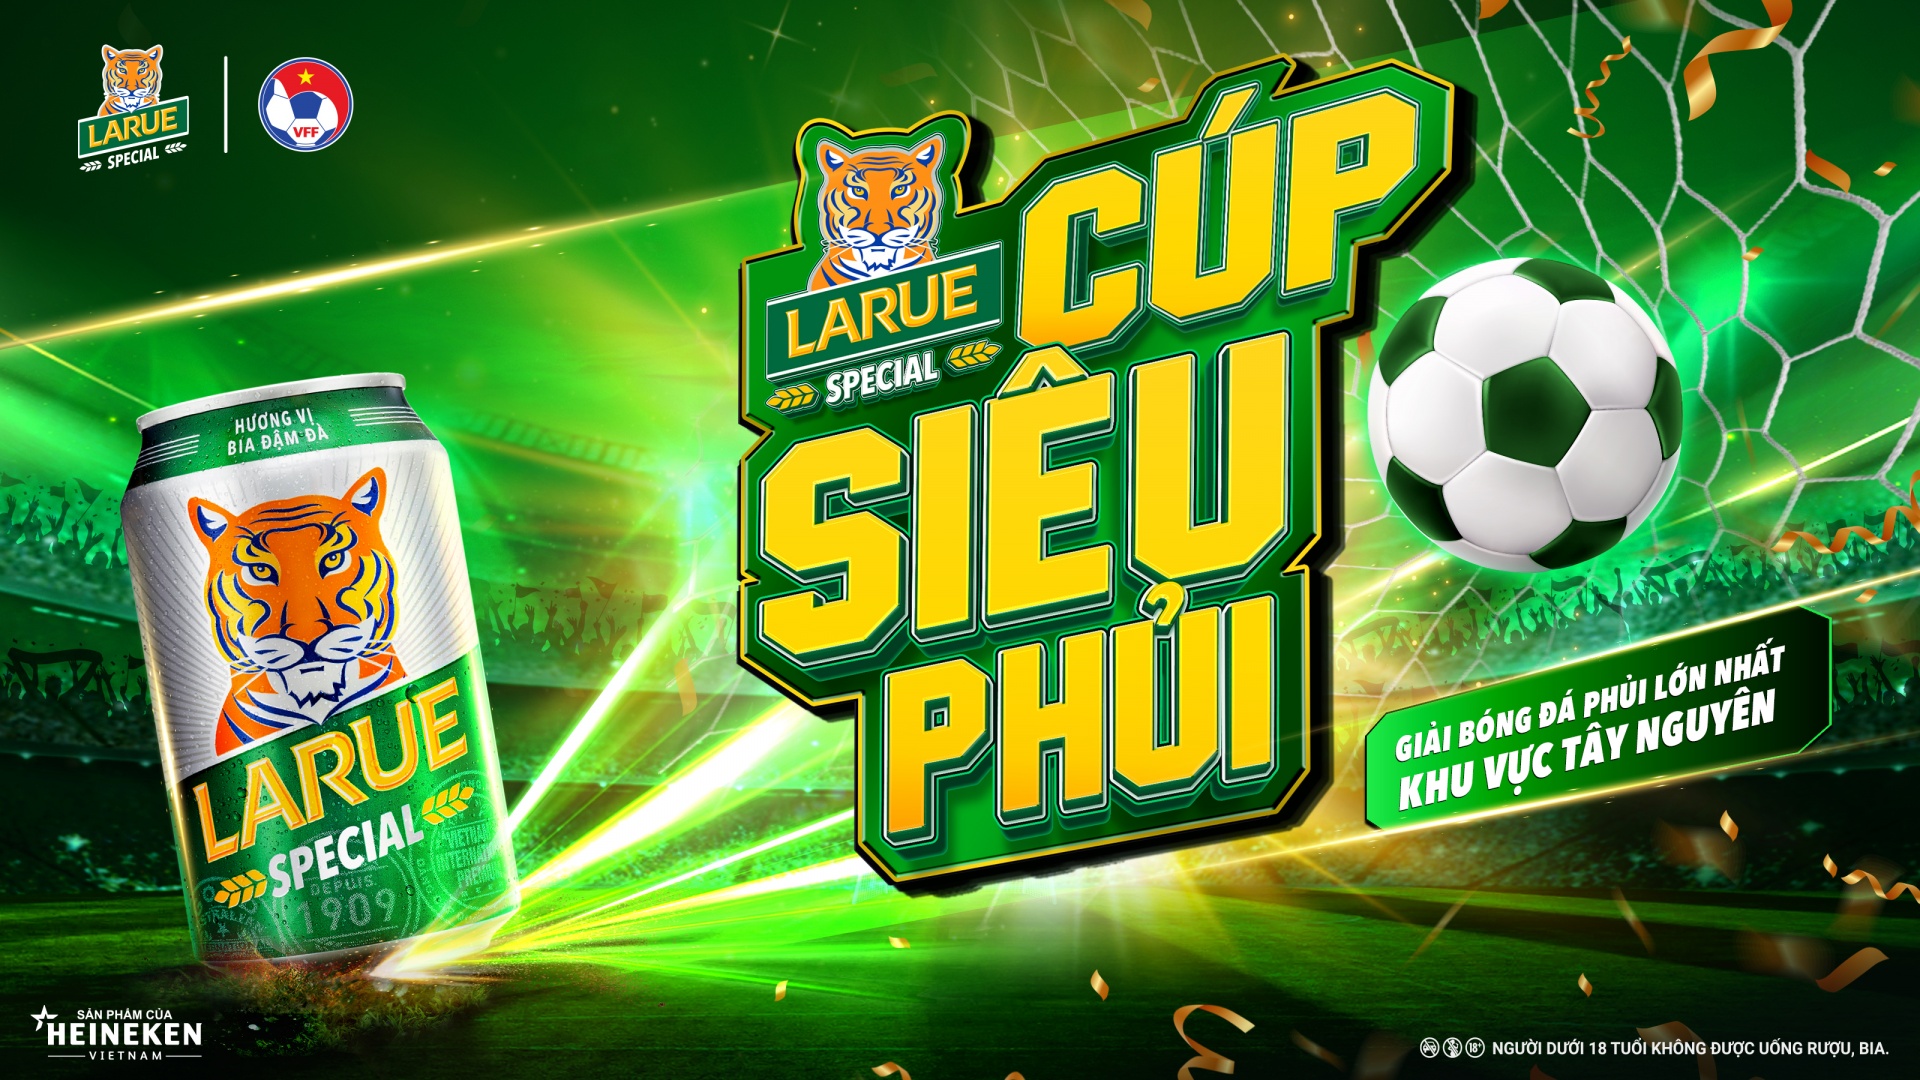 Larue links with VFF to host football cup competition